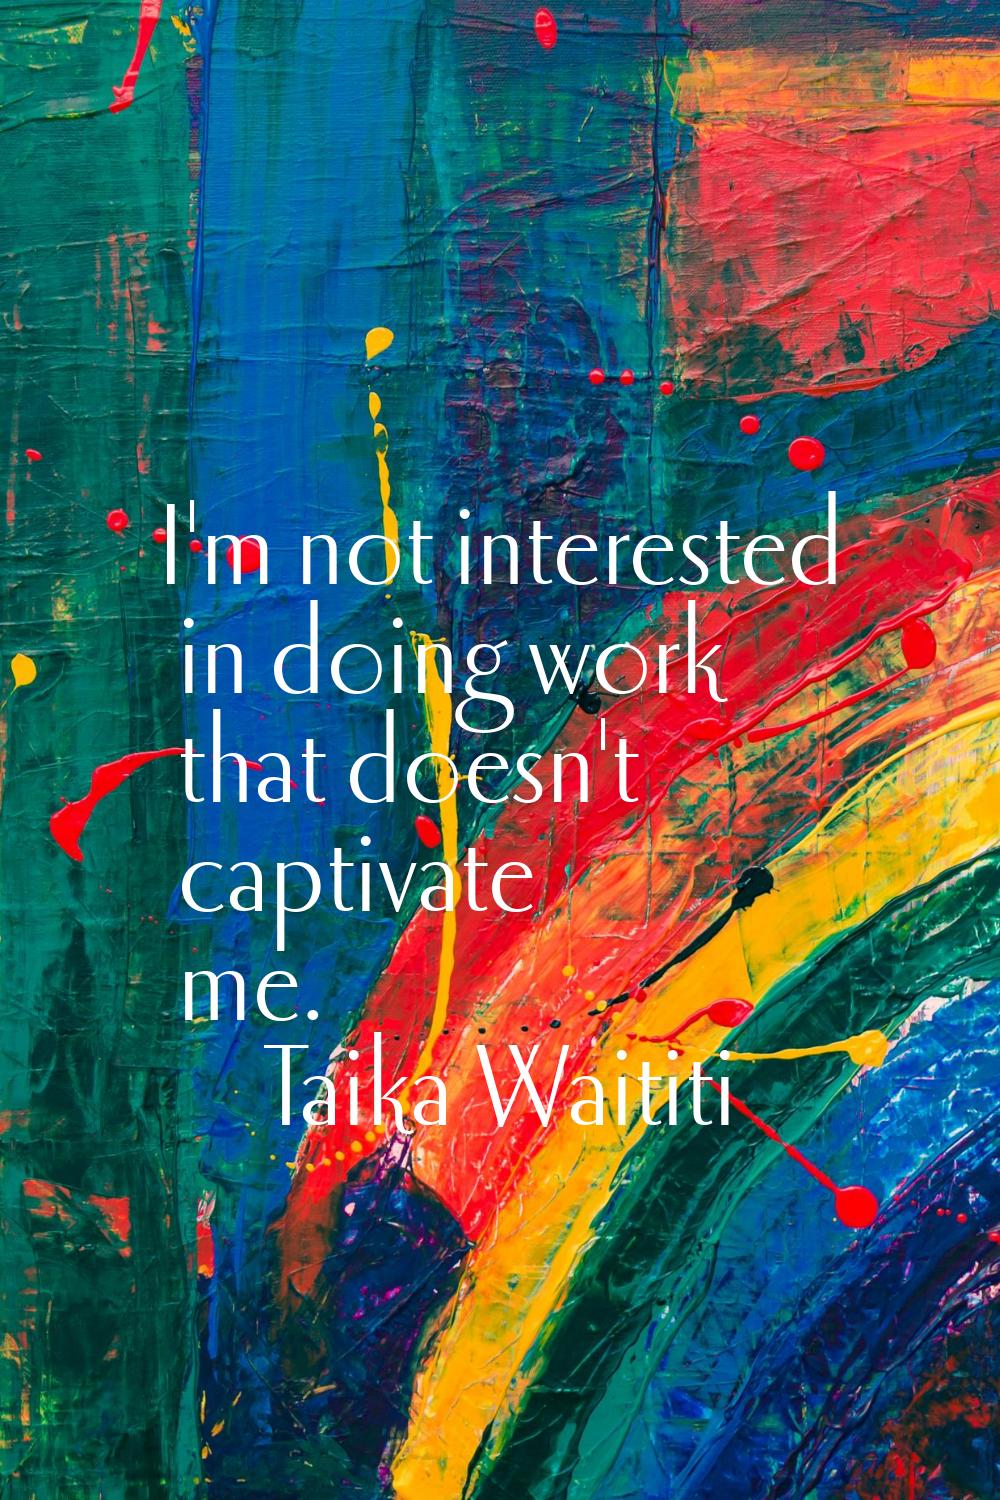 I'm not interested in doing work that doesn't captivate me.